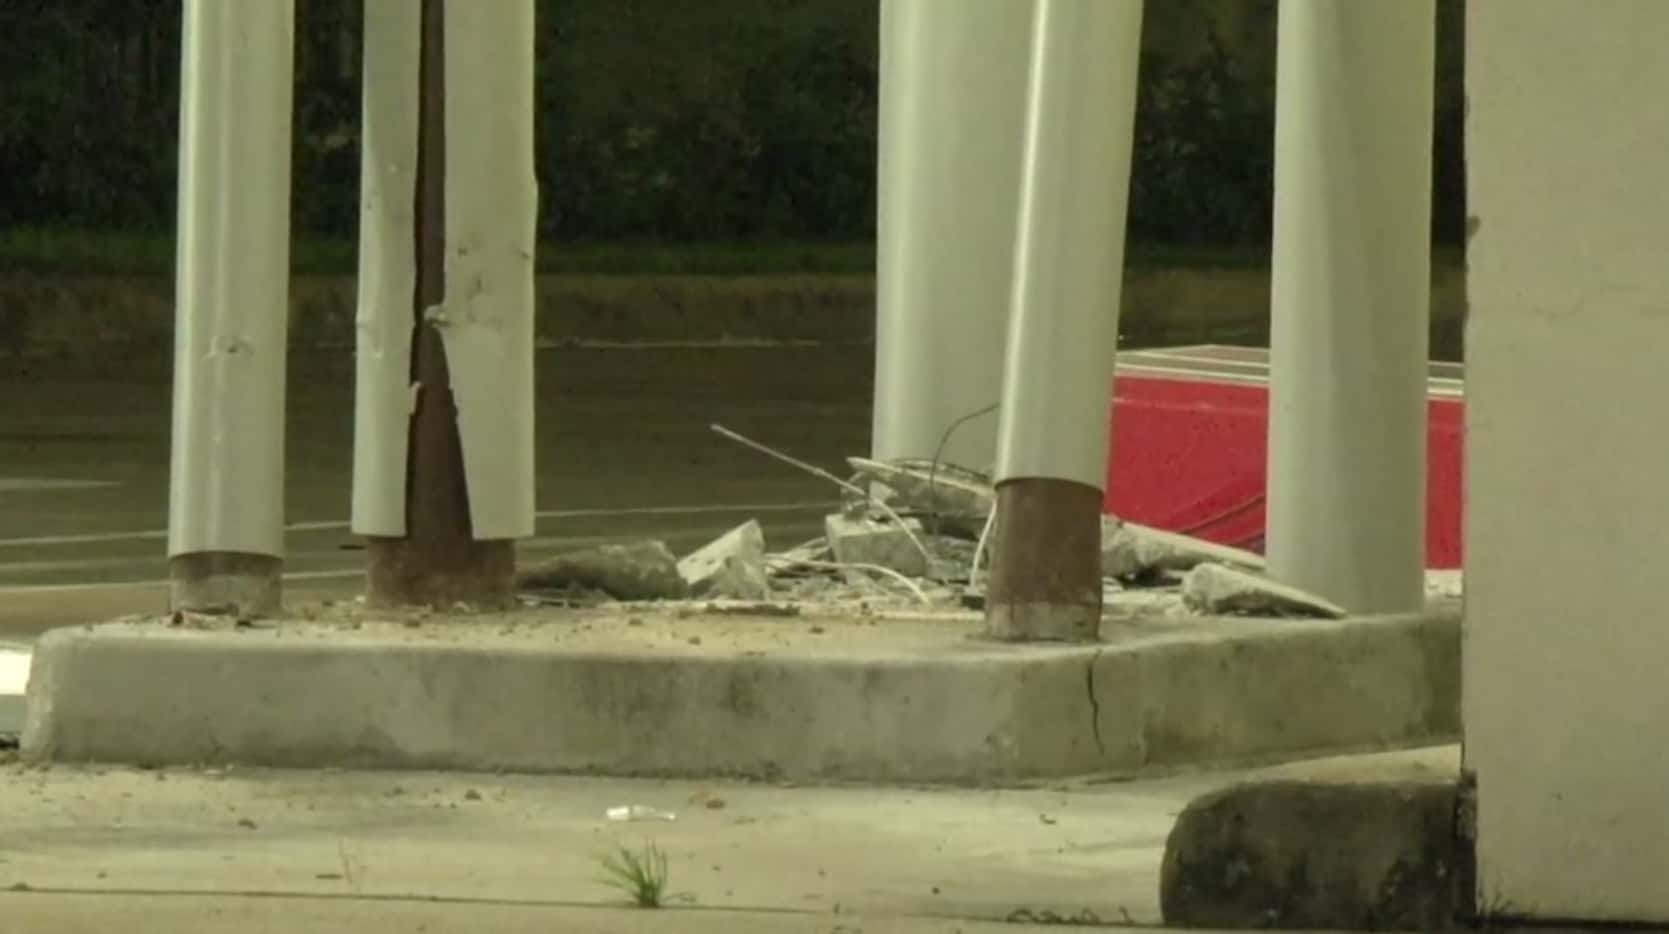 An image of the damage left behind after thieves used a forklift to pull an ATM from its...